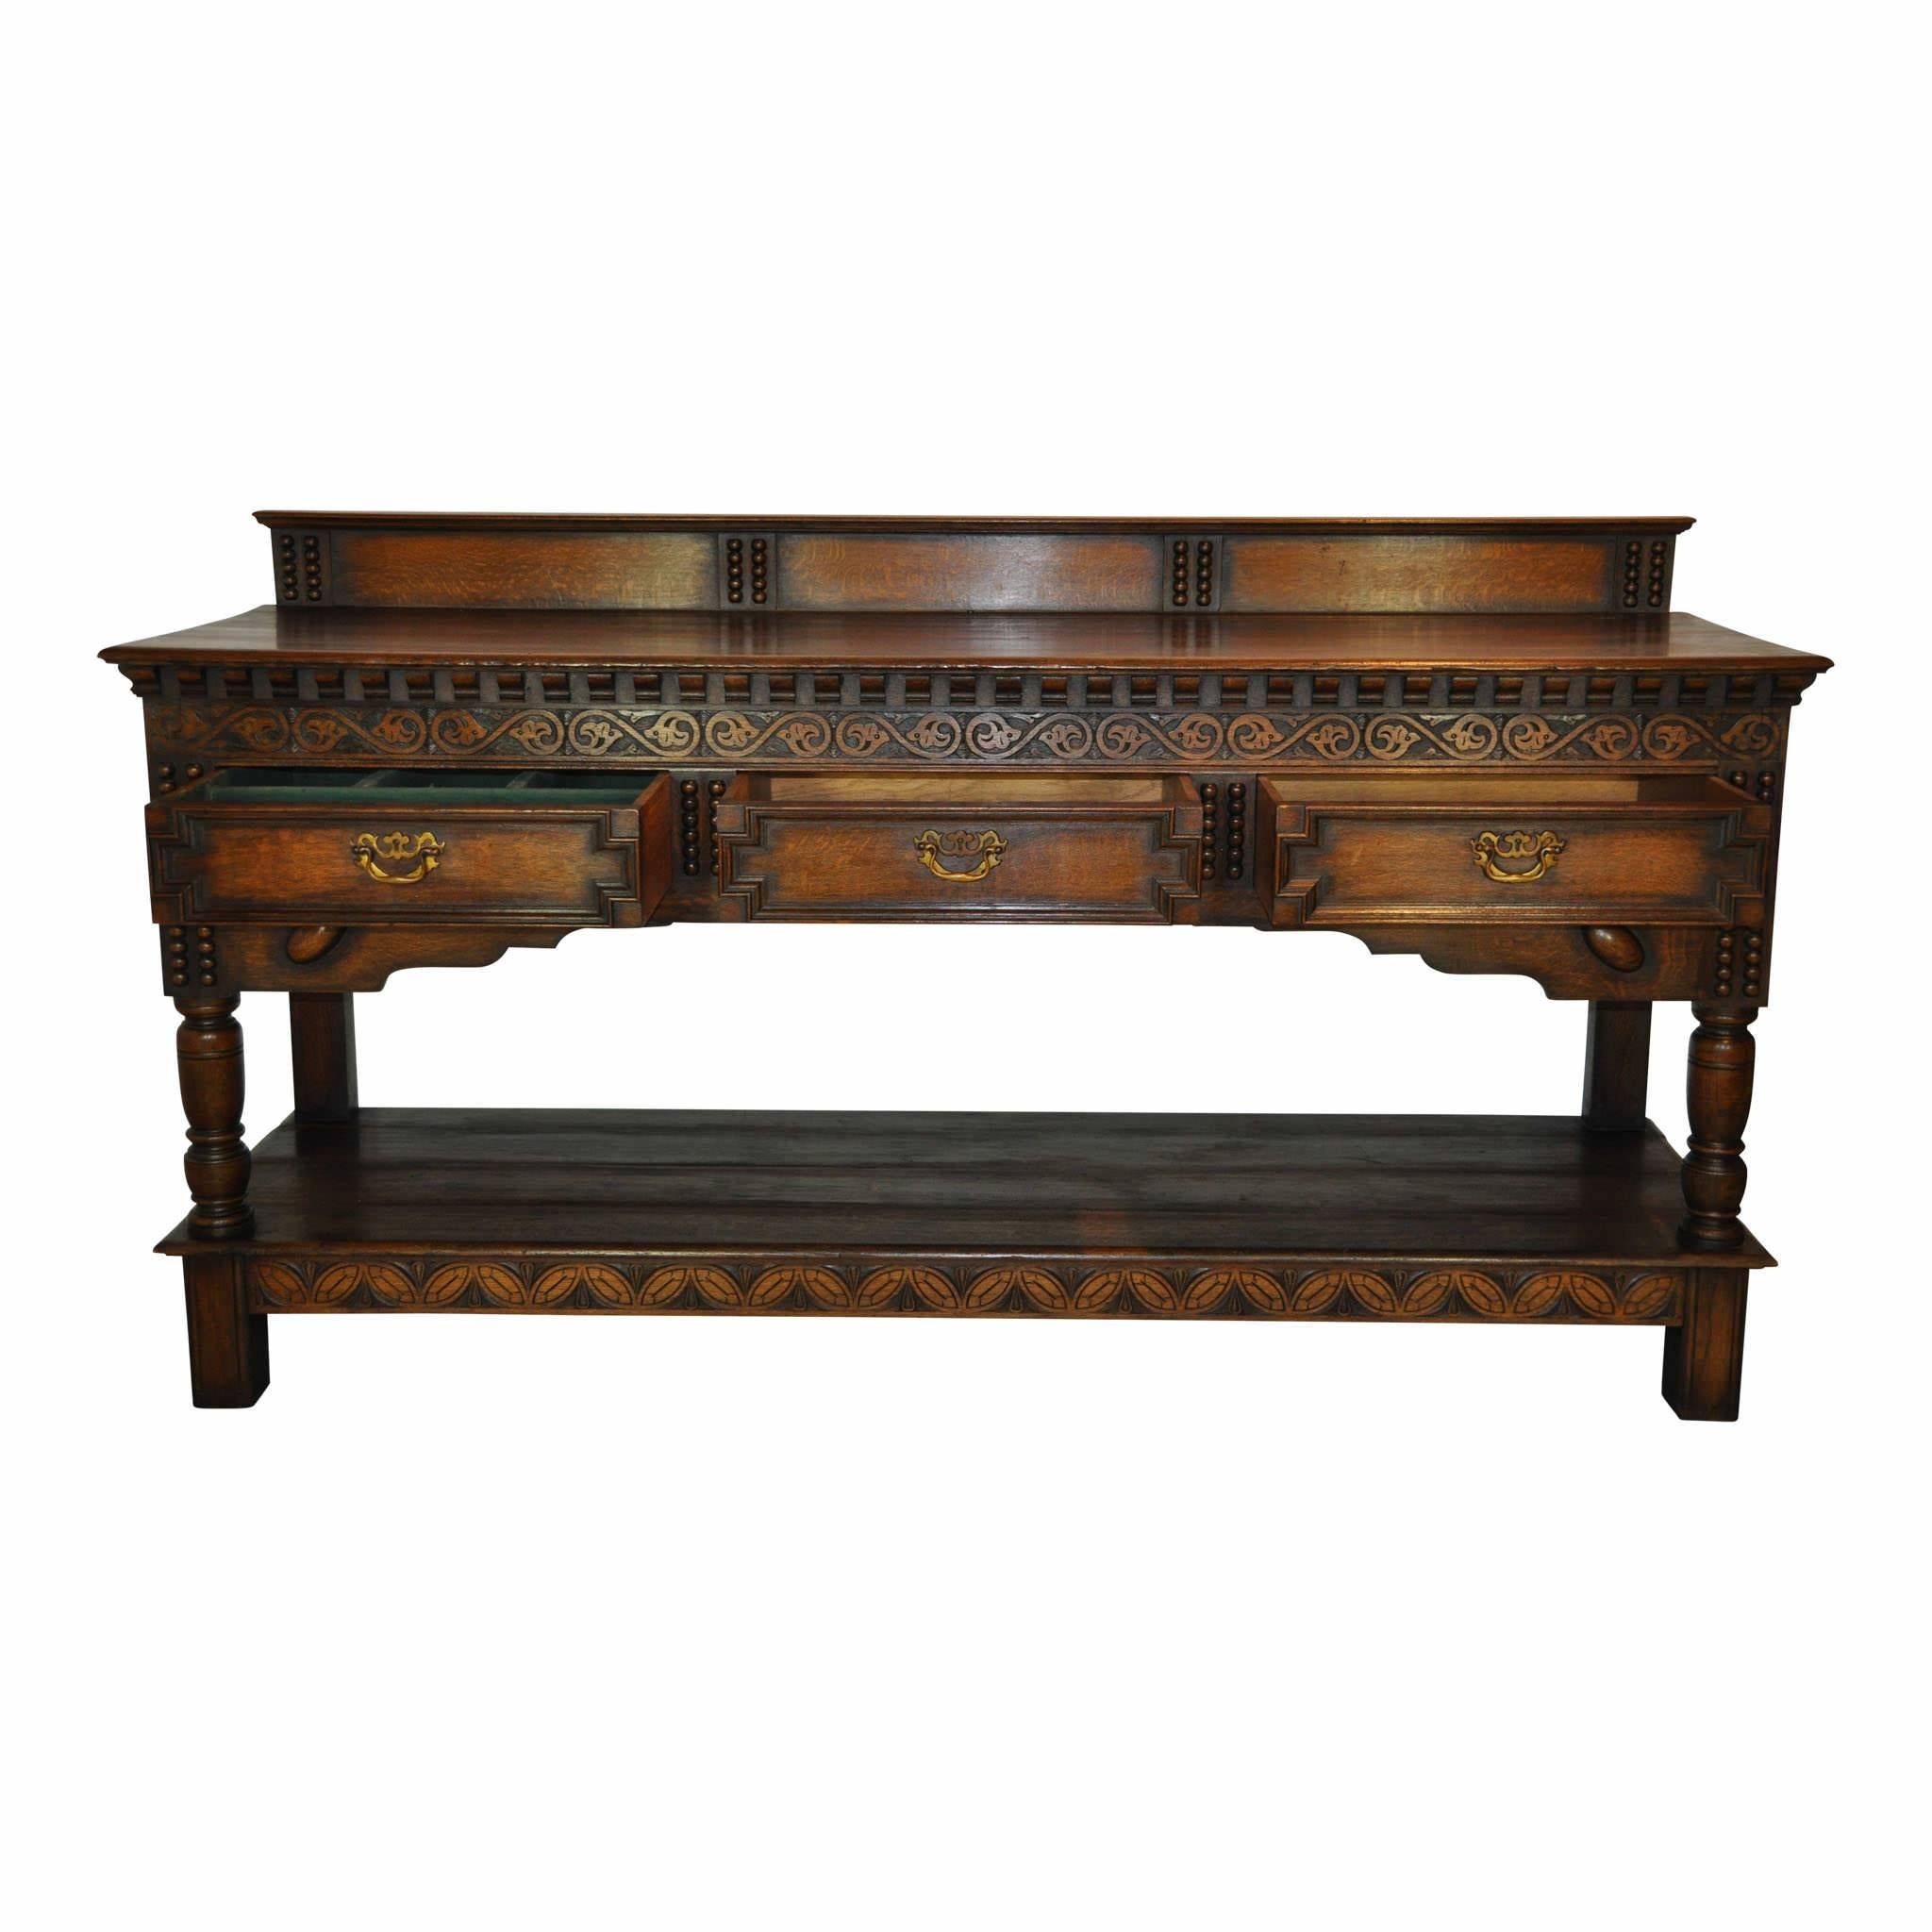 The clean lines of this server are accentuated by decorative floral carvings and beaded trim. The underside trim of the counter is comprised of mini corbels, giving a nice juxtaposition with the decorative carvings. Three drawers for storage, one